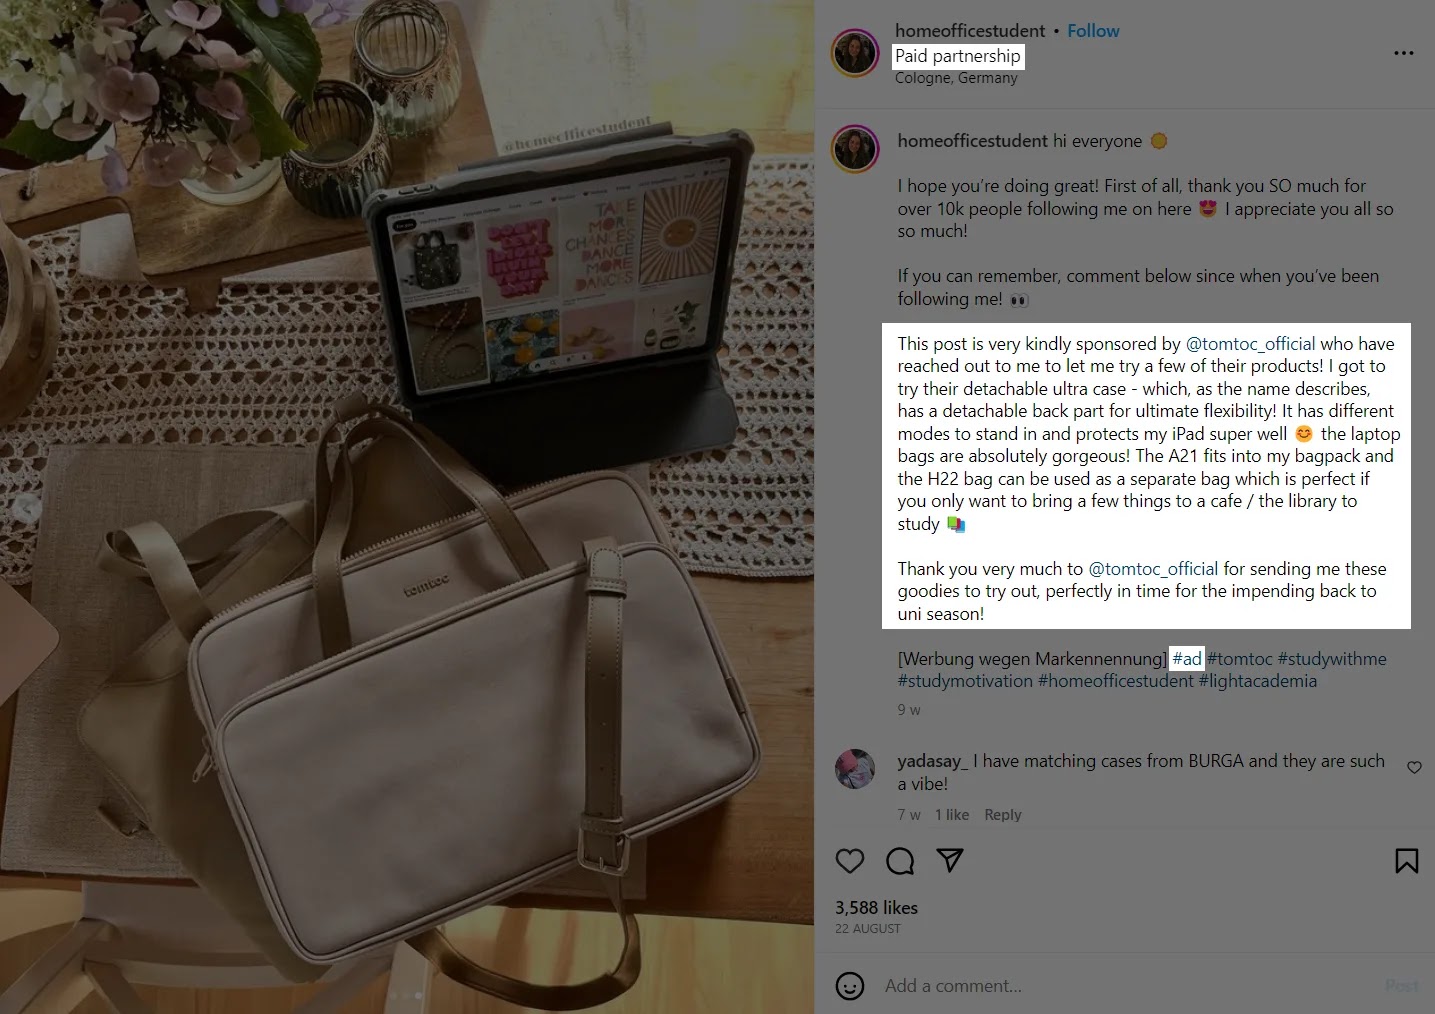 Instagram influencer @homeofficestudent's paid partnership post with Tomtoc